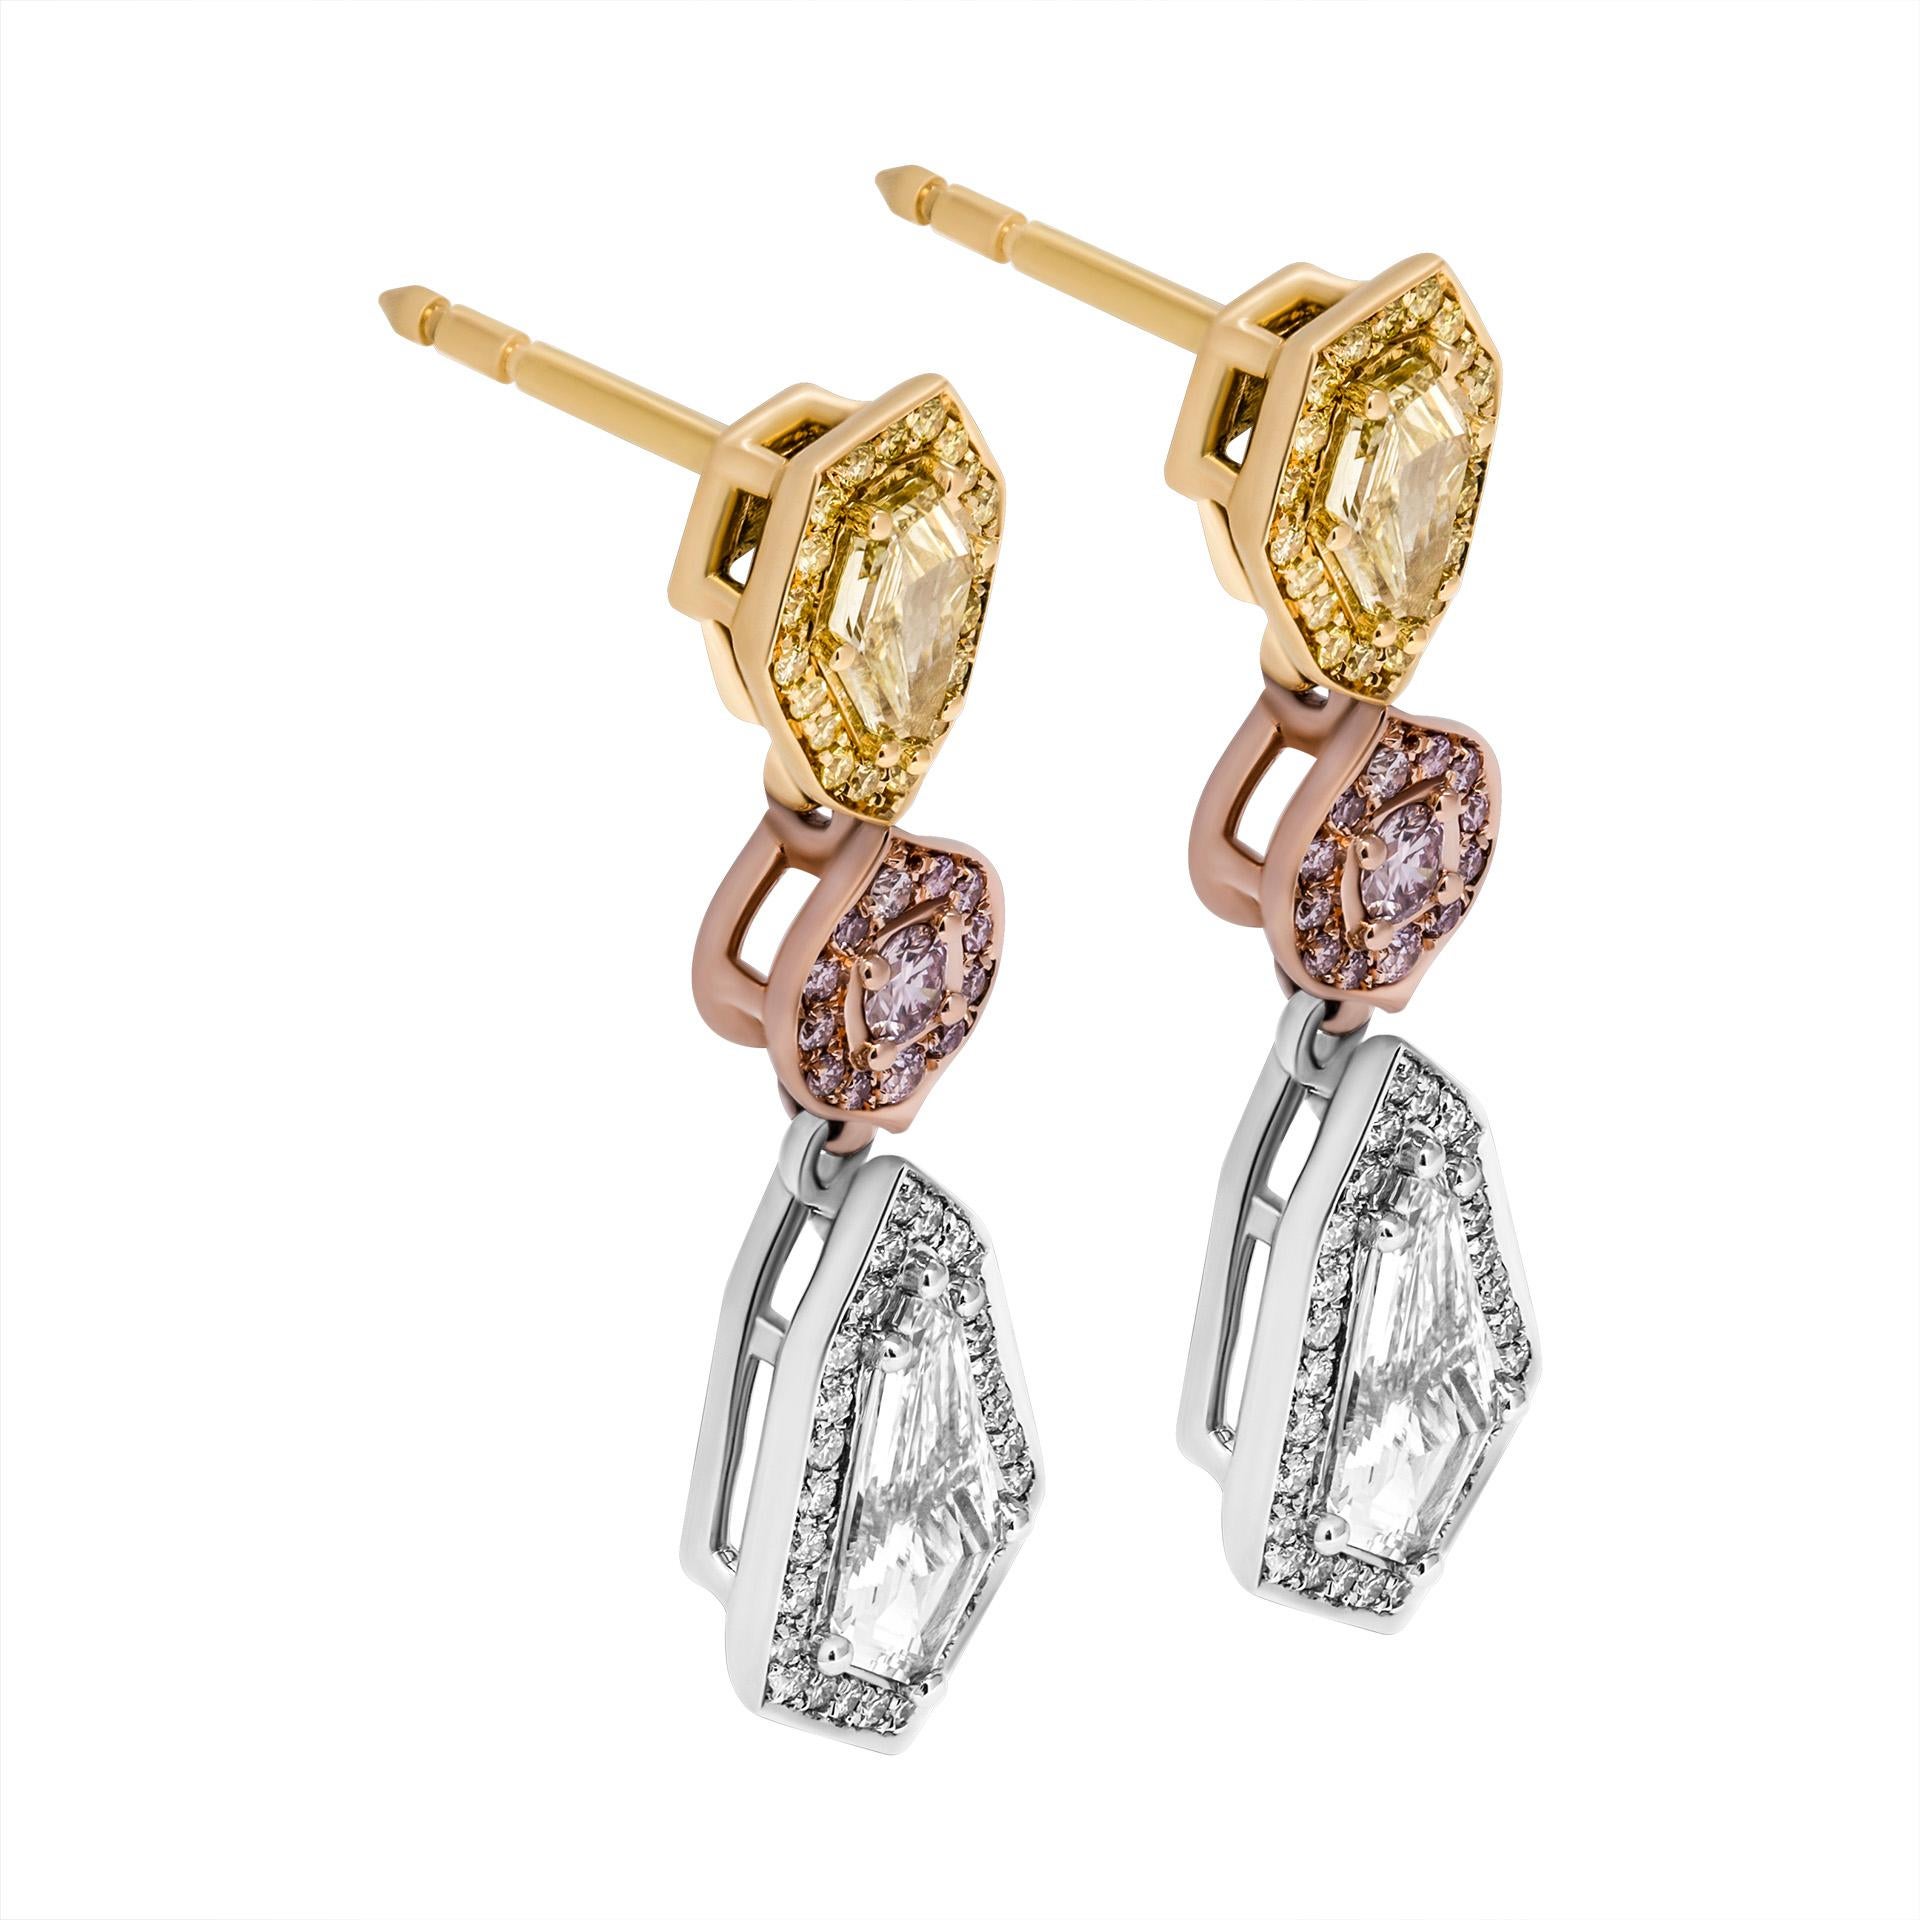 Earrings in 18K Yellow, 18K Rose Gold and Platinum 
Diamonds ( from he top yo the bottom): 

0.32ct Fancy Yellow VVS1 shield shaped diamond GIA#5222509767
0.33ct Fancy Yellow VVS2 shield shaped diamond GIA#6223509766

2 Round Fancy Pink Diamonds